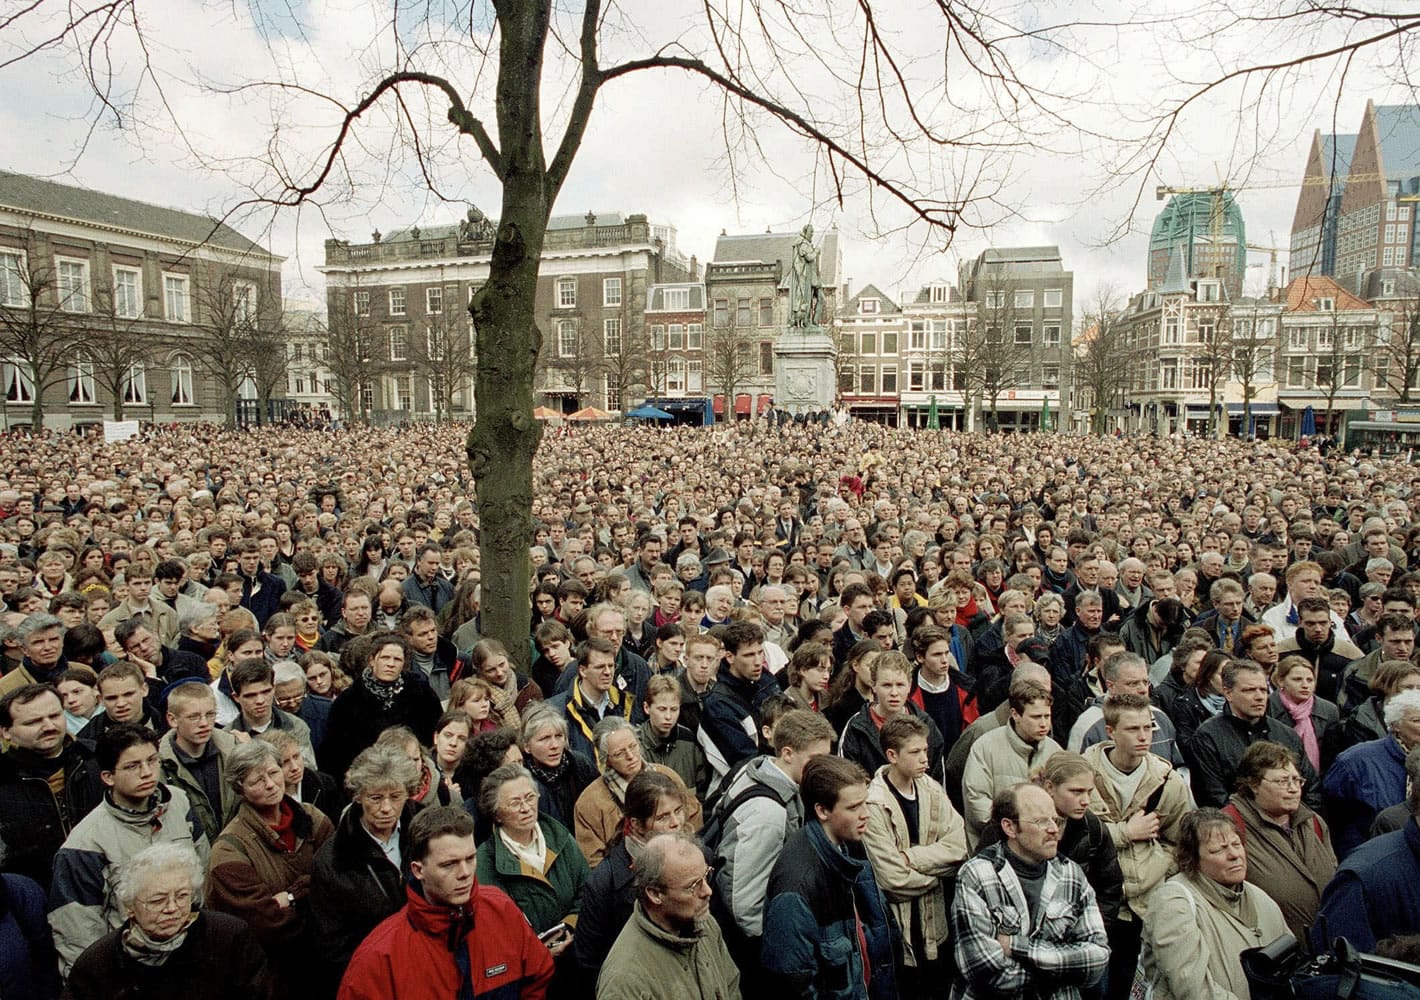 housands of protesters demonstrate outside Dutch government buildings at The Hague, Netherlands, as the Upper House of Parliament voted to legalize euthanasia April 10, 2001.